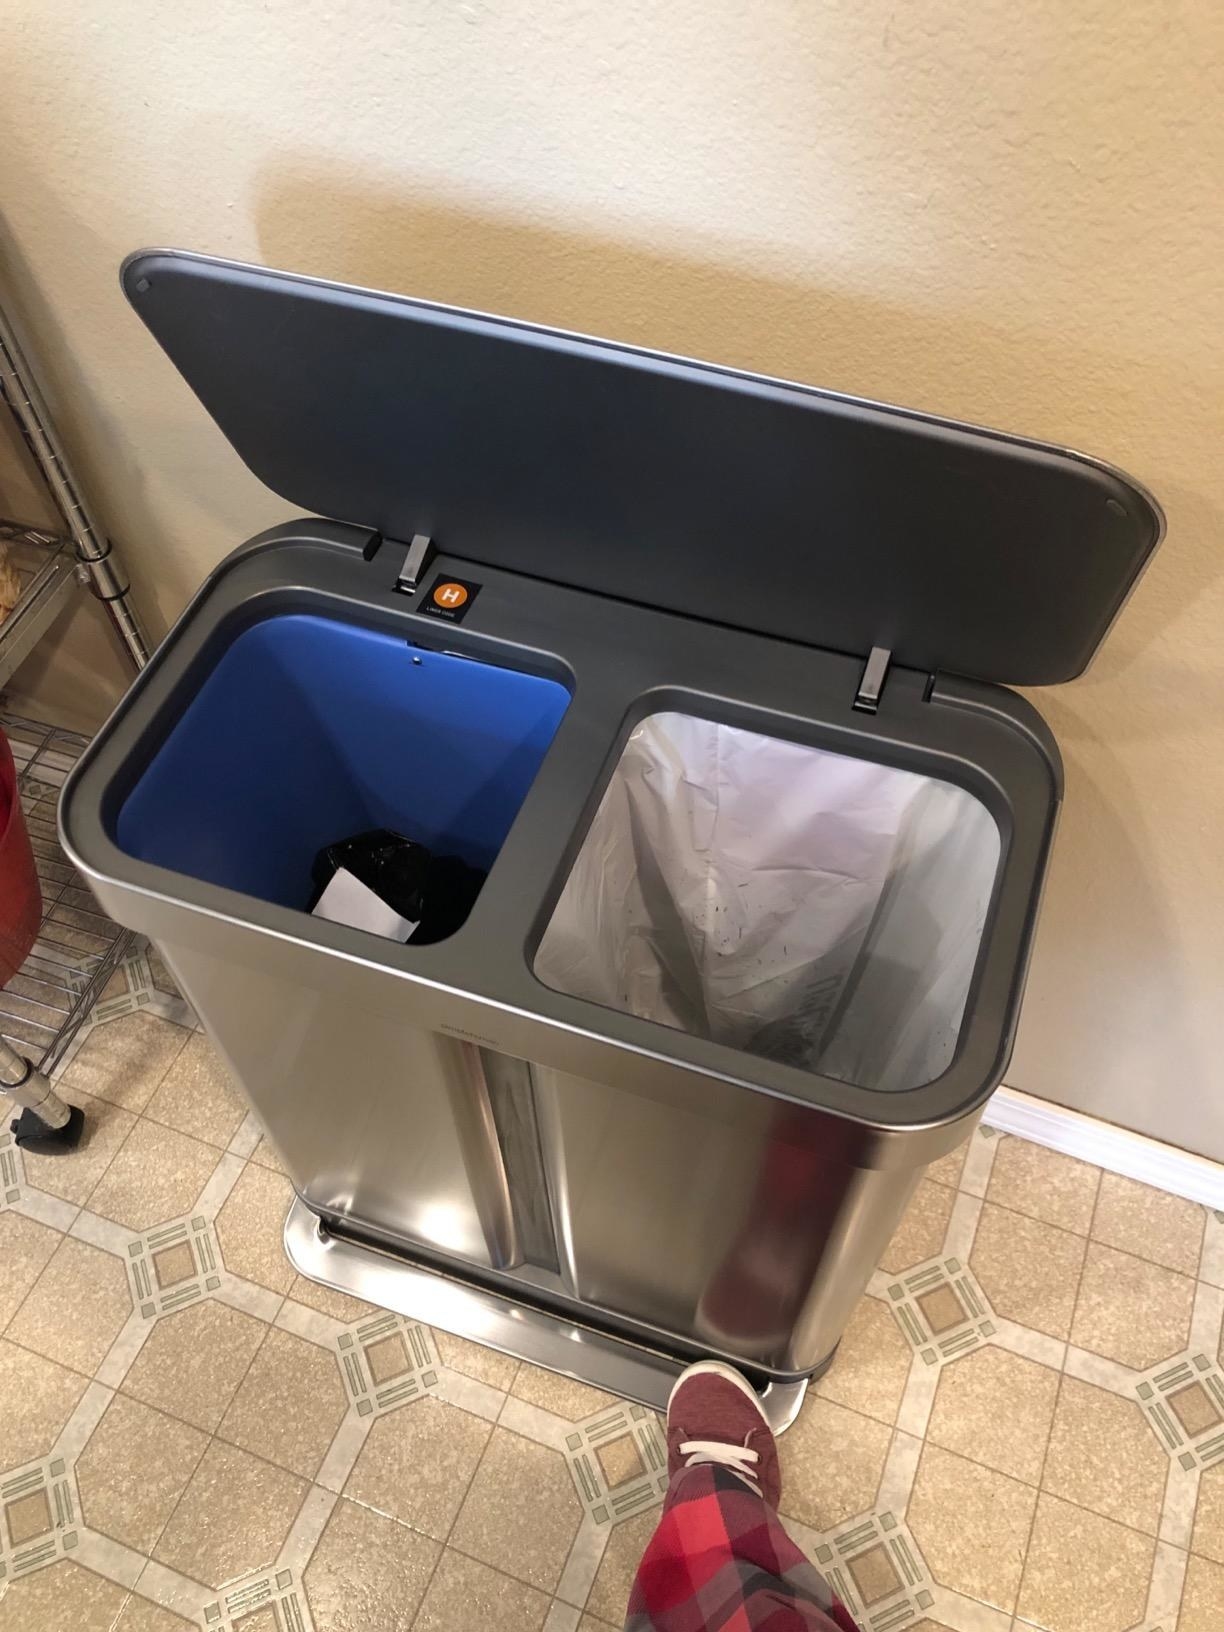 reviewer steps on pedal of dual garbage can